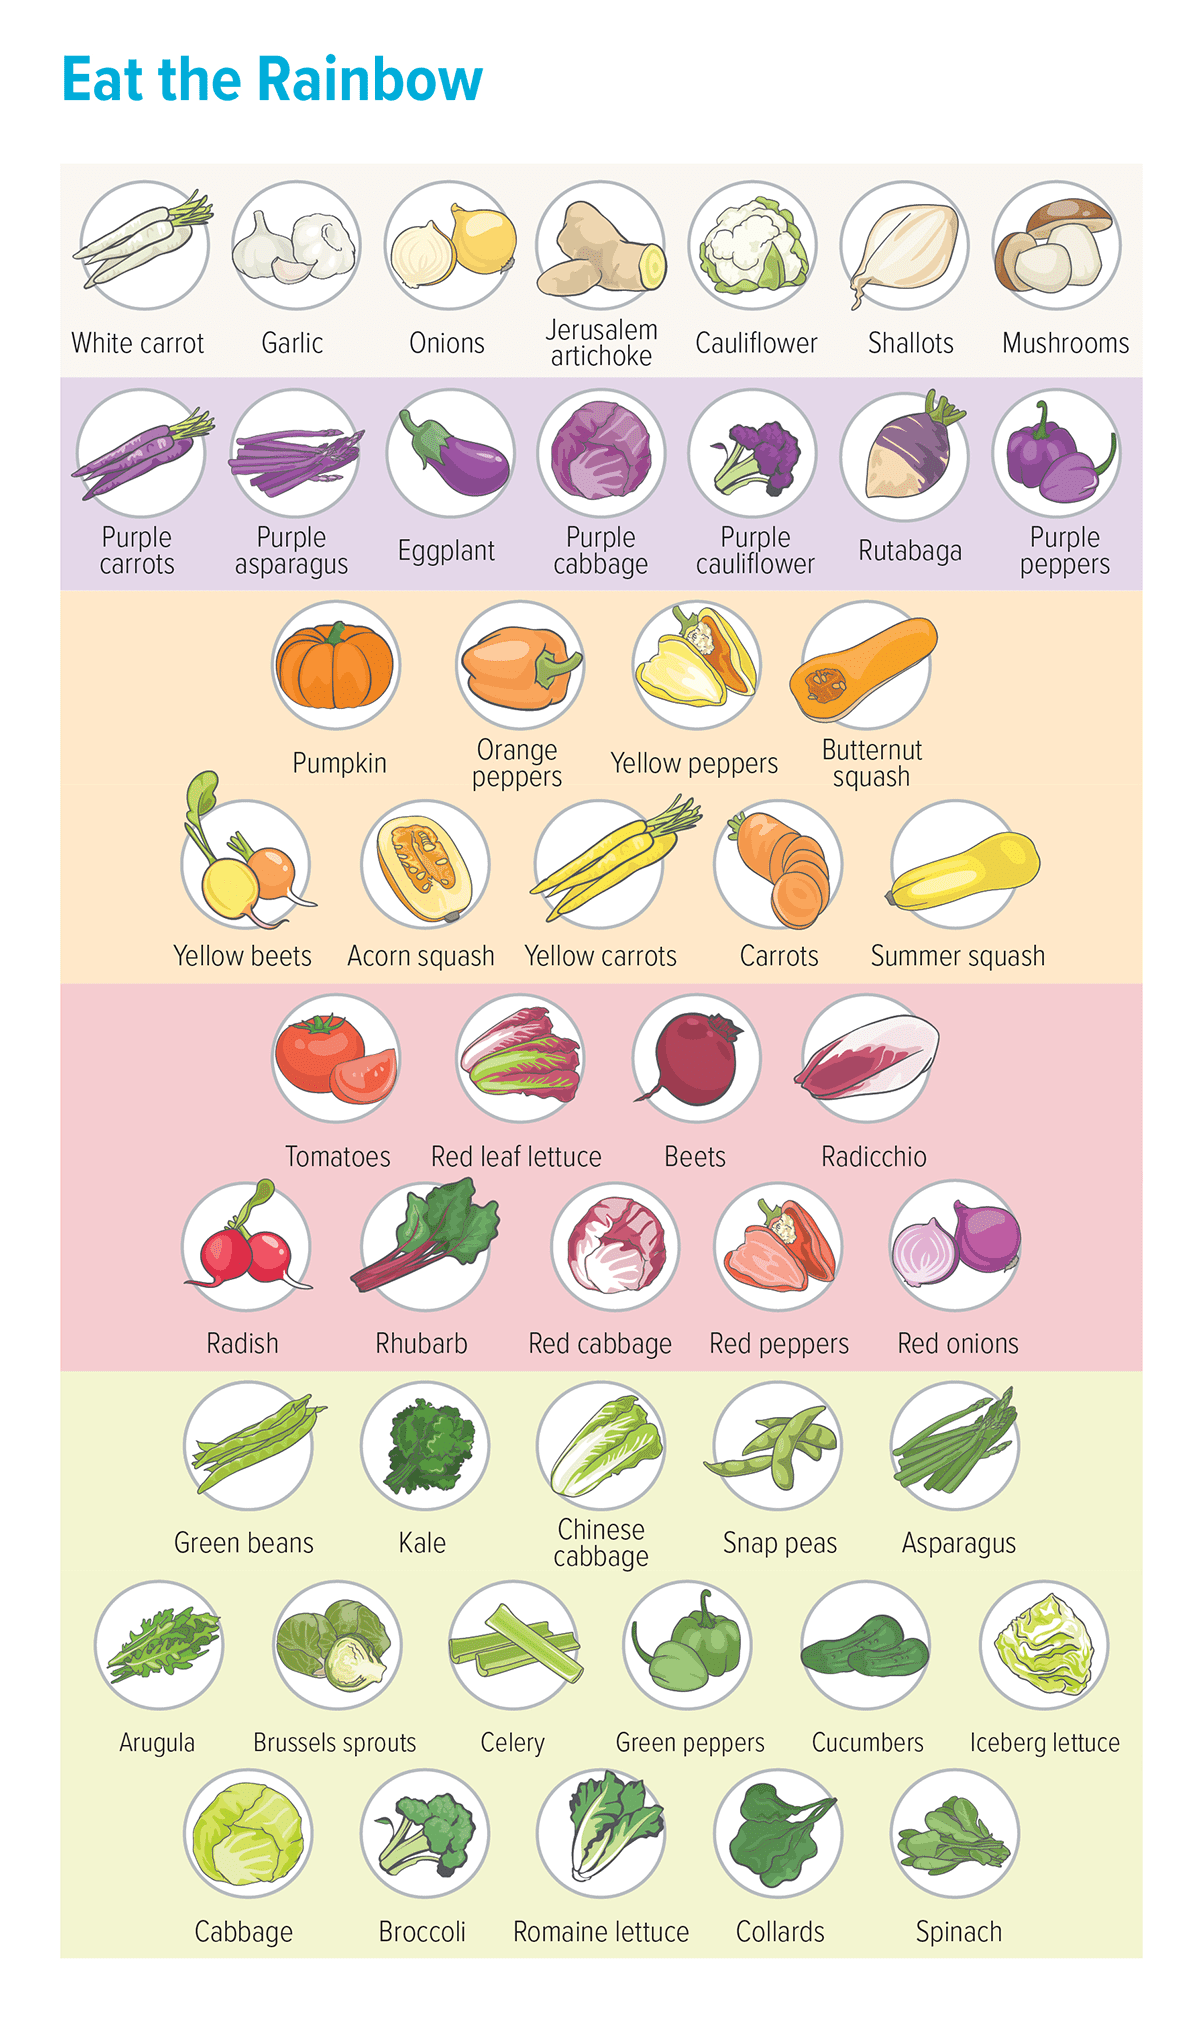 A graphic that shows a vegetable food list categorized by the color of the vegetables. Red vegetables: beets, tomatoes, red leaf lettuce, rhubarb, radicchio, red cabbage, red onions, red peppers. Purple vegetables: purple asparagus, eggplant, purple cabbage, purple carrots, purple peppers, rutabaga. Green vegetables: Chinese cabbage, arugula, kale, green beans, Brussels sprouts, celery, snap peas, asparagus, cabbage, broccoli, green peppers, Romaine lettuce, cucumbers, iceberg lettuce, spinach, collards. White vegetables: cauliflower, shallots, white carrot, mushrooms, garlic, Jerusalem artichoke, onions. Yellow/Orange vegetables: pumpkin, butternut squash, orange peppers, carrots, yellow peppers, acorn squash, yellow beets, summer squash, carrots, yellow carrots. Remember: Eating a wide variety of vegetables helps ensure you get all teh nutrients you need for optimal sports nutrition and maximal performance. 